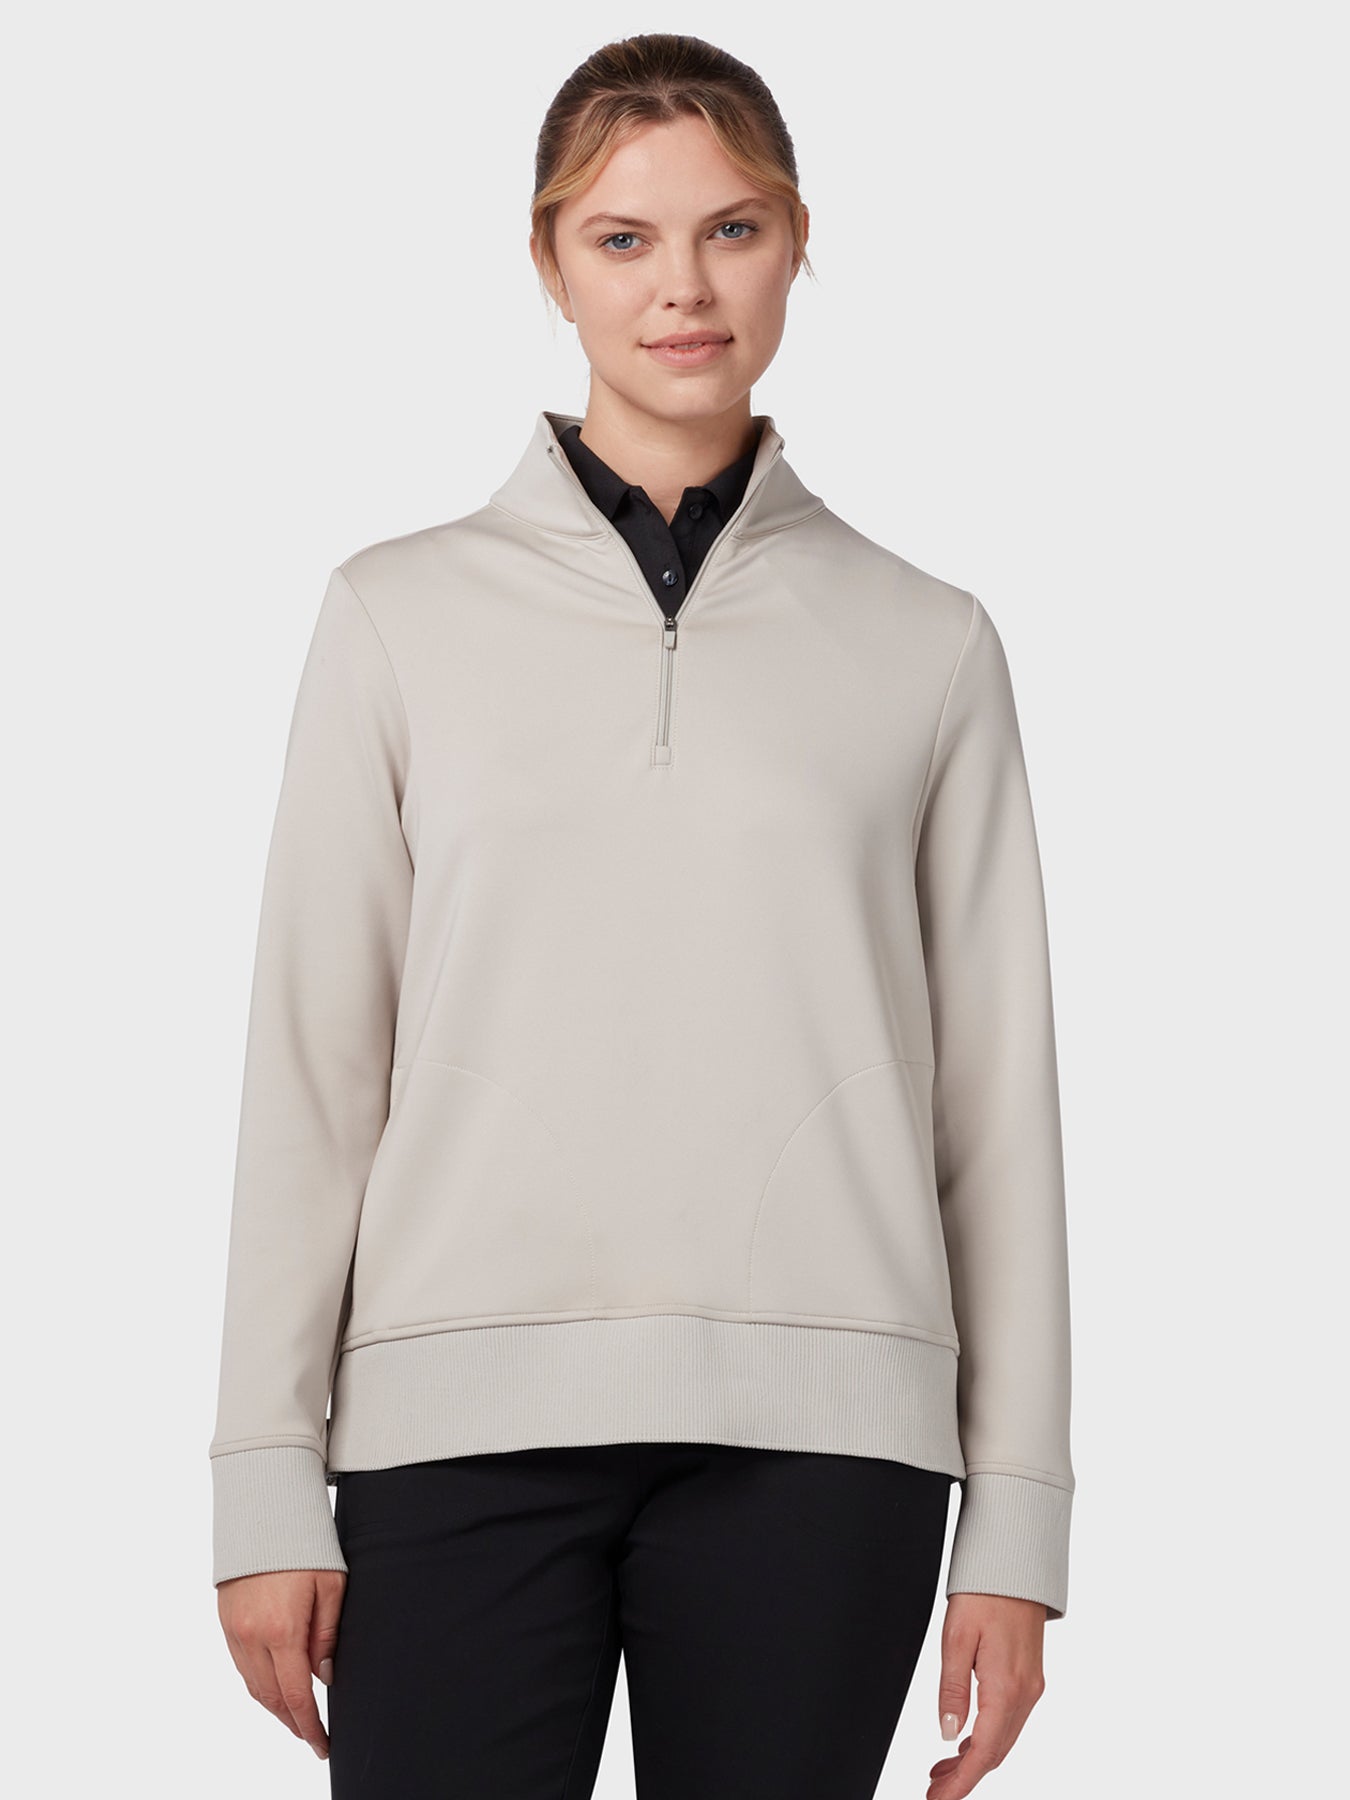 View Midweight Womens Fleece Crossover In Chateau Grey Chateau Grey XXL information